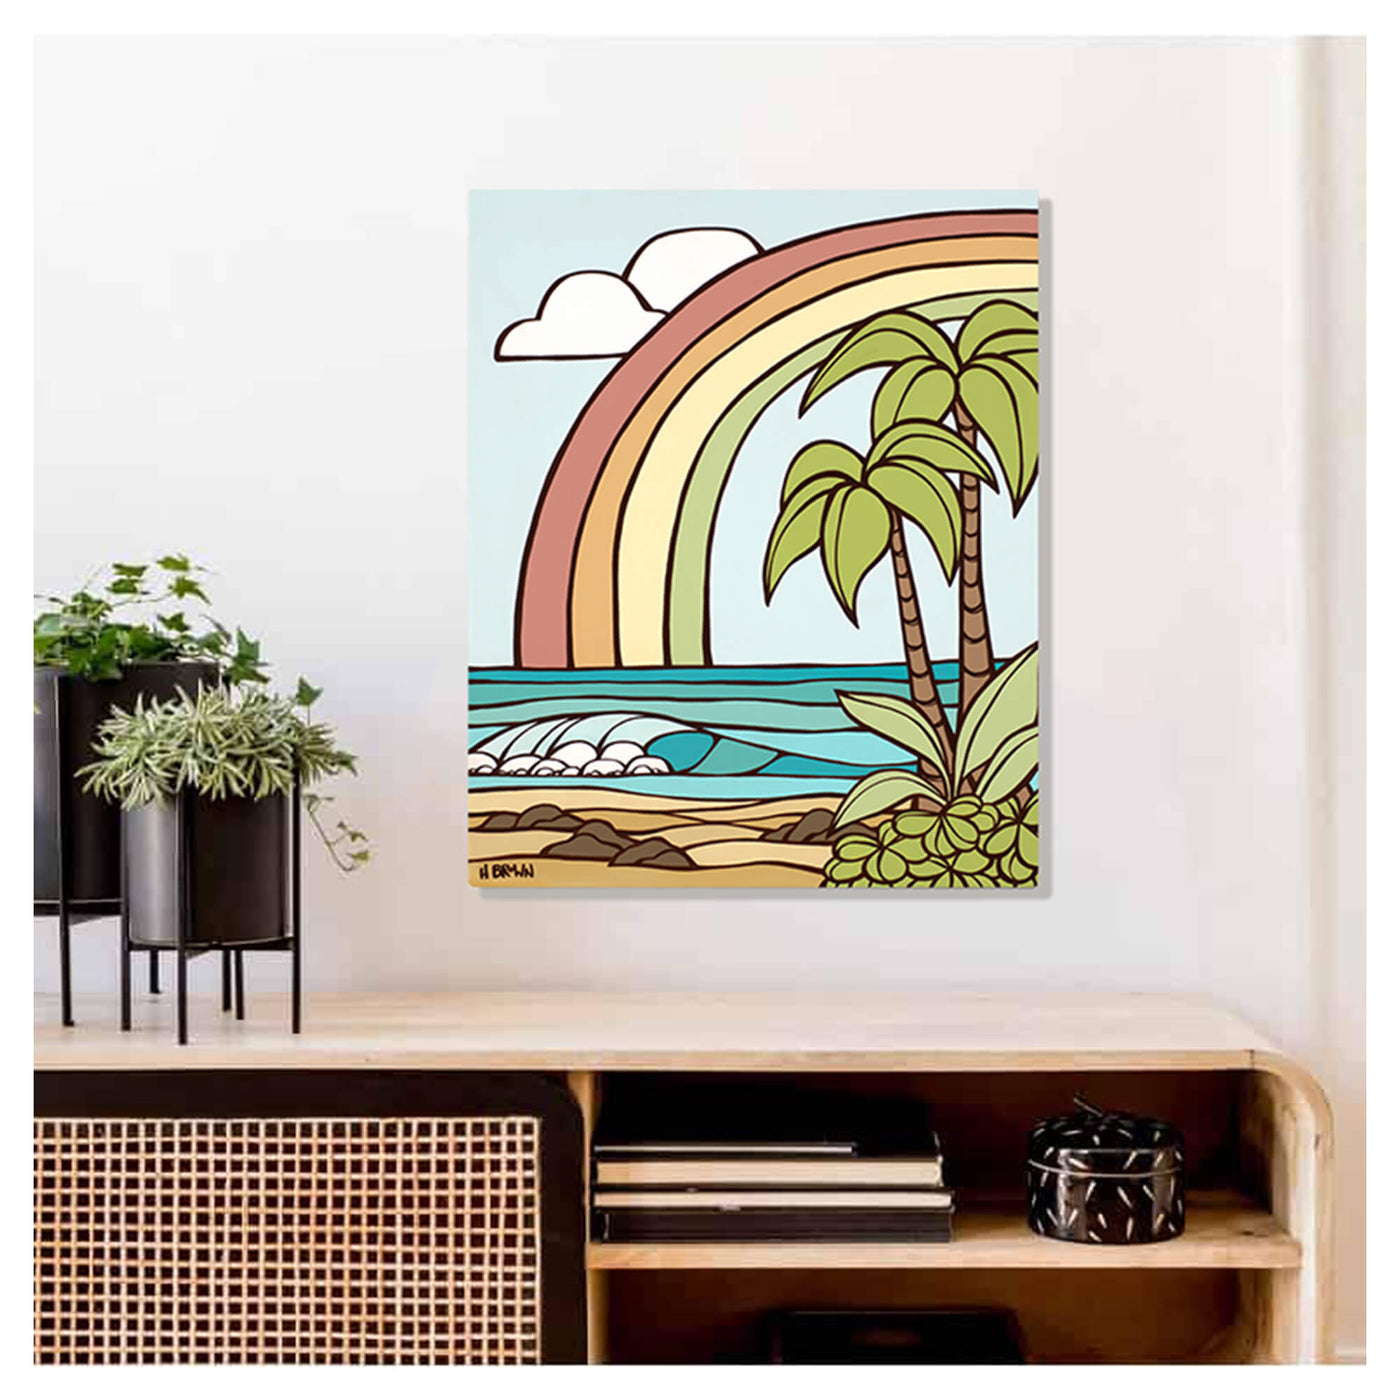 A vibrant colored ocean with rolling waves framed a by a rainbow by Hawaii surf artist Heather Brown